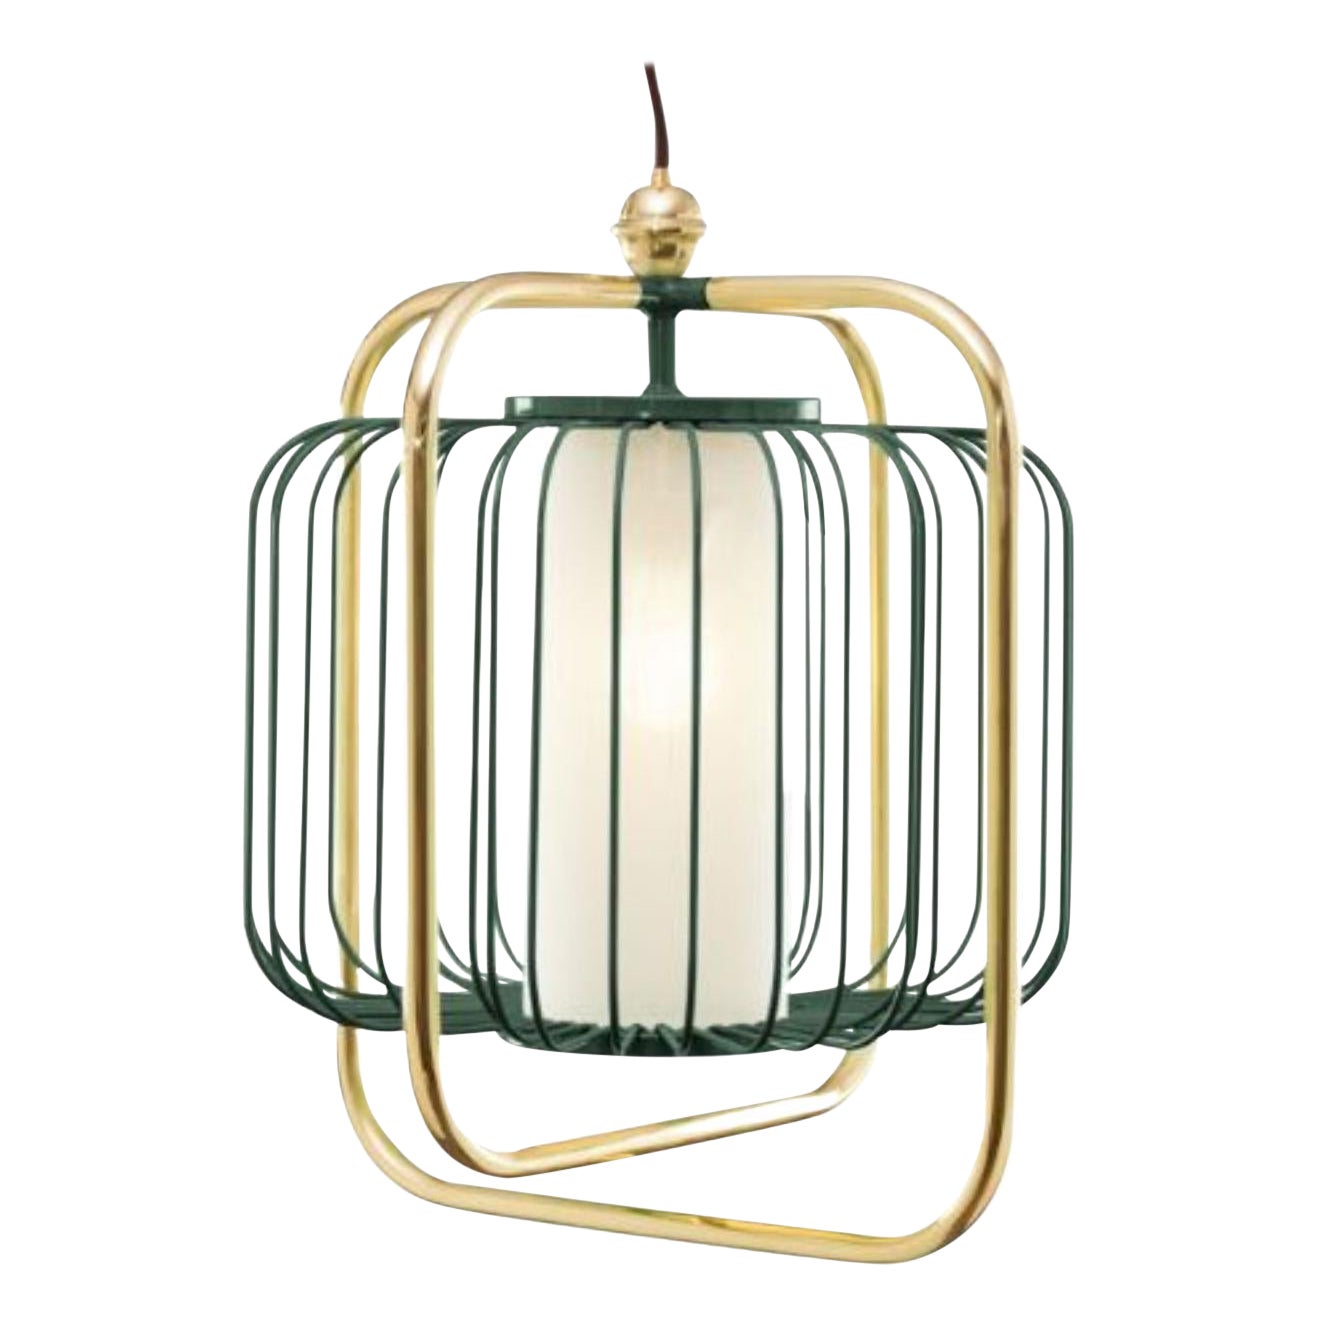 Brass and Moss Jules III Suspension Lamp by Dooq